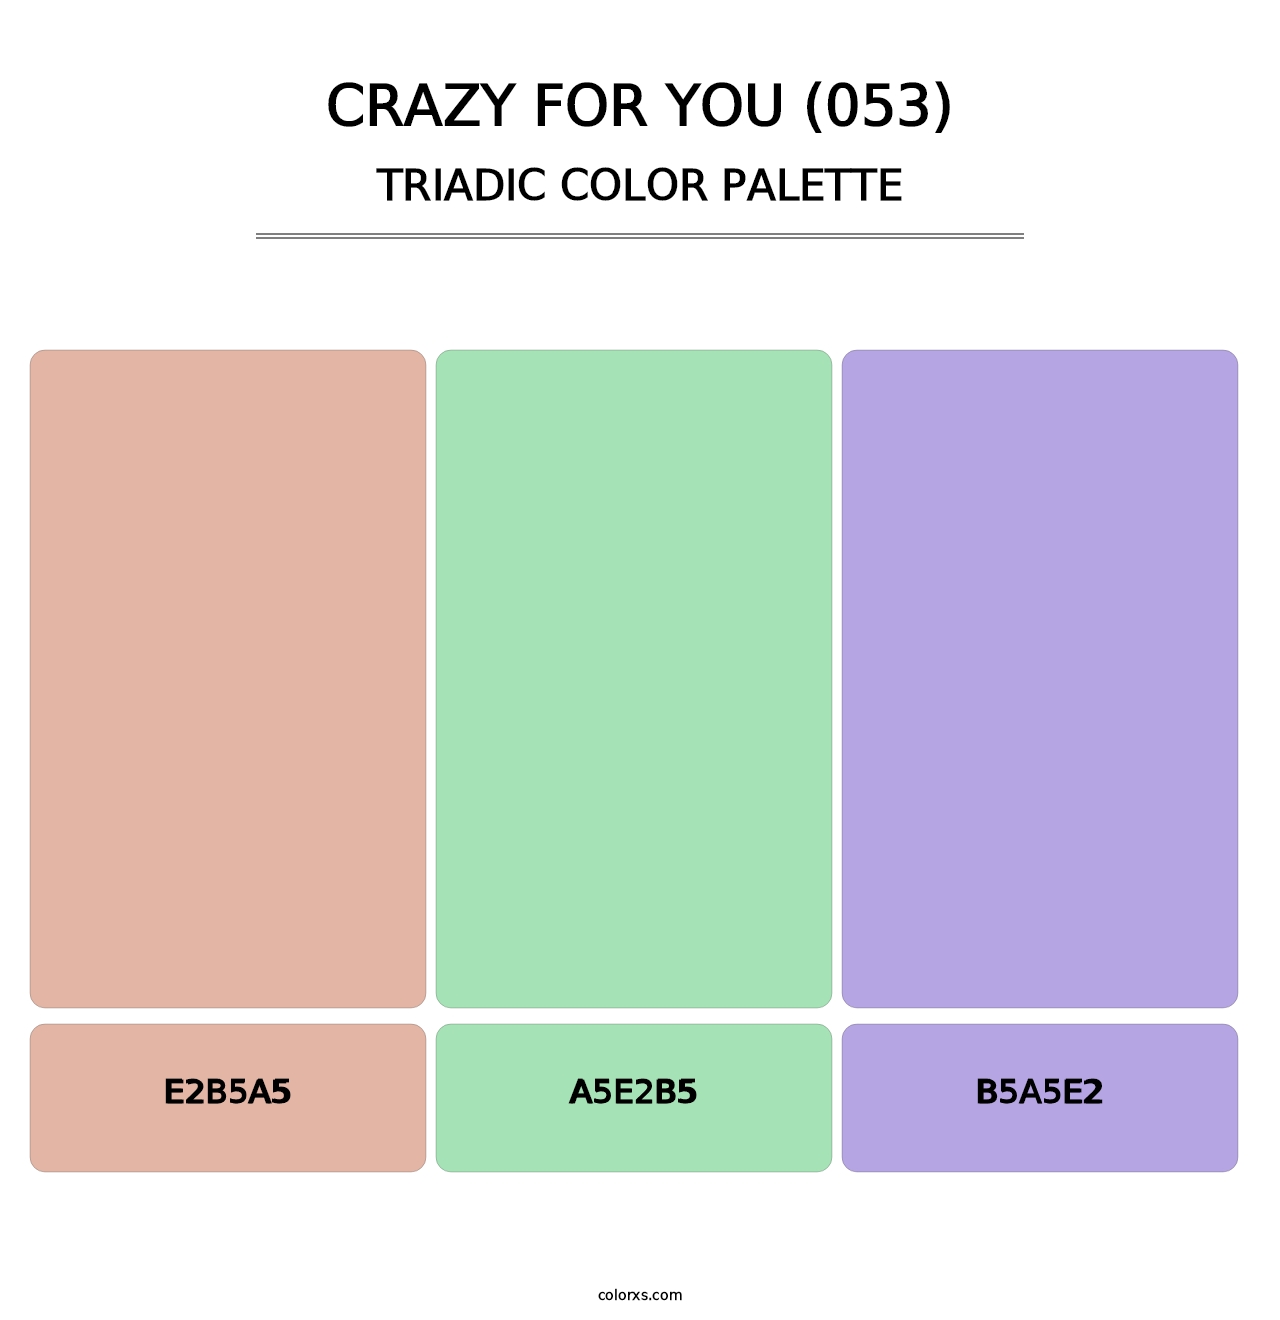 Crazy For You (053) - Triadic Color Palette